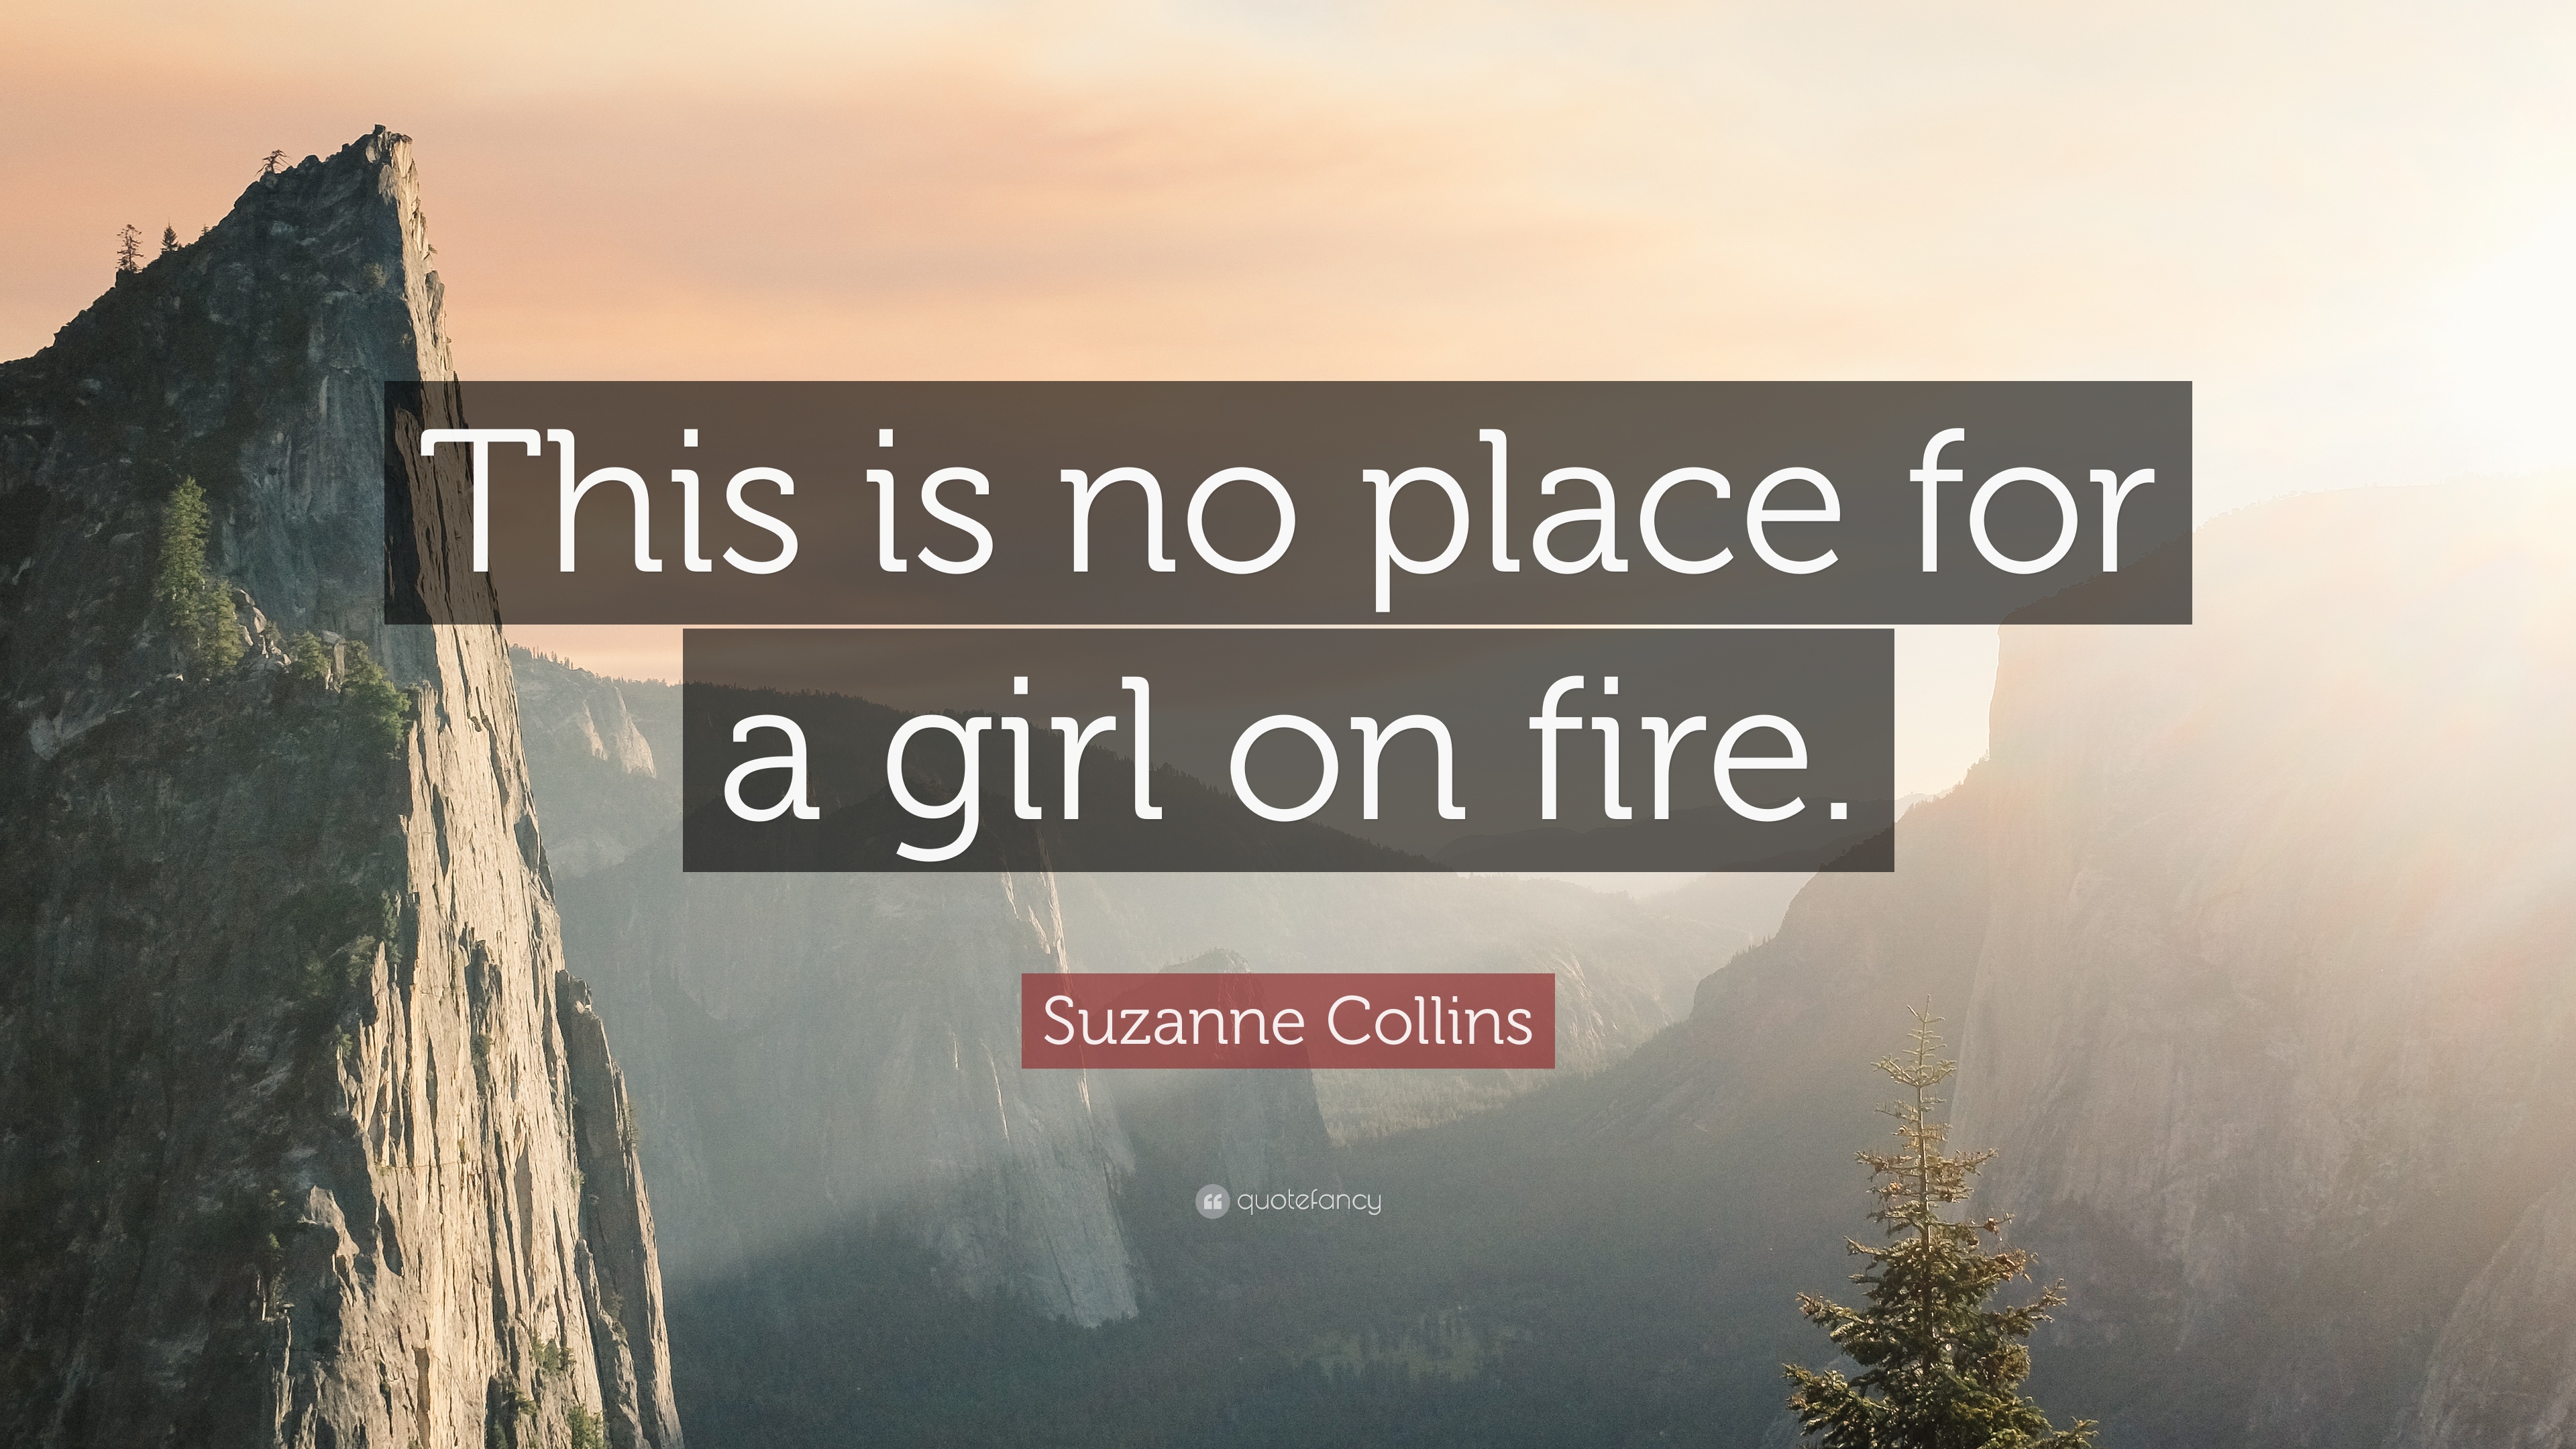 Suzanne Collins Quote: “This is no place for a girl on fire